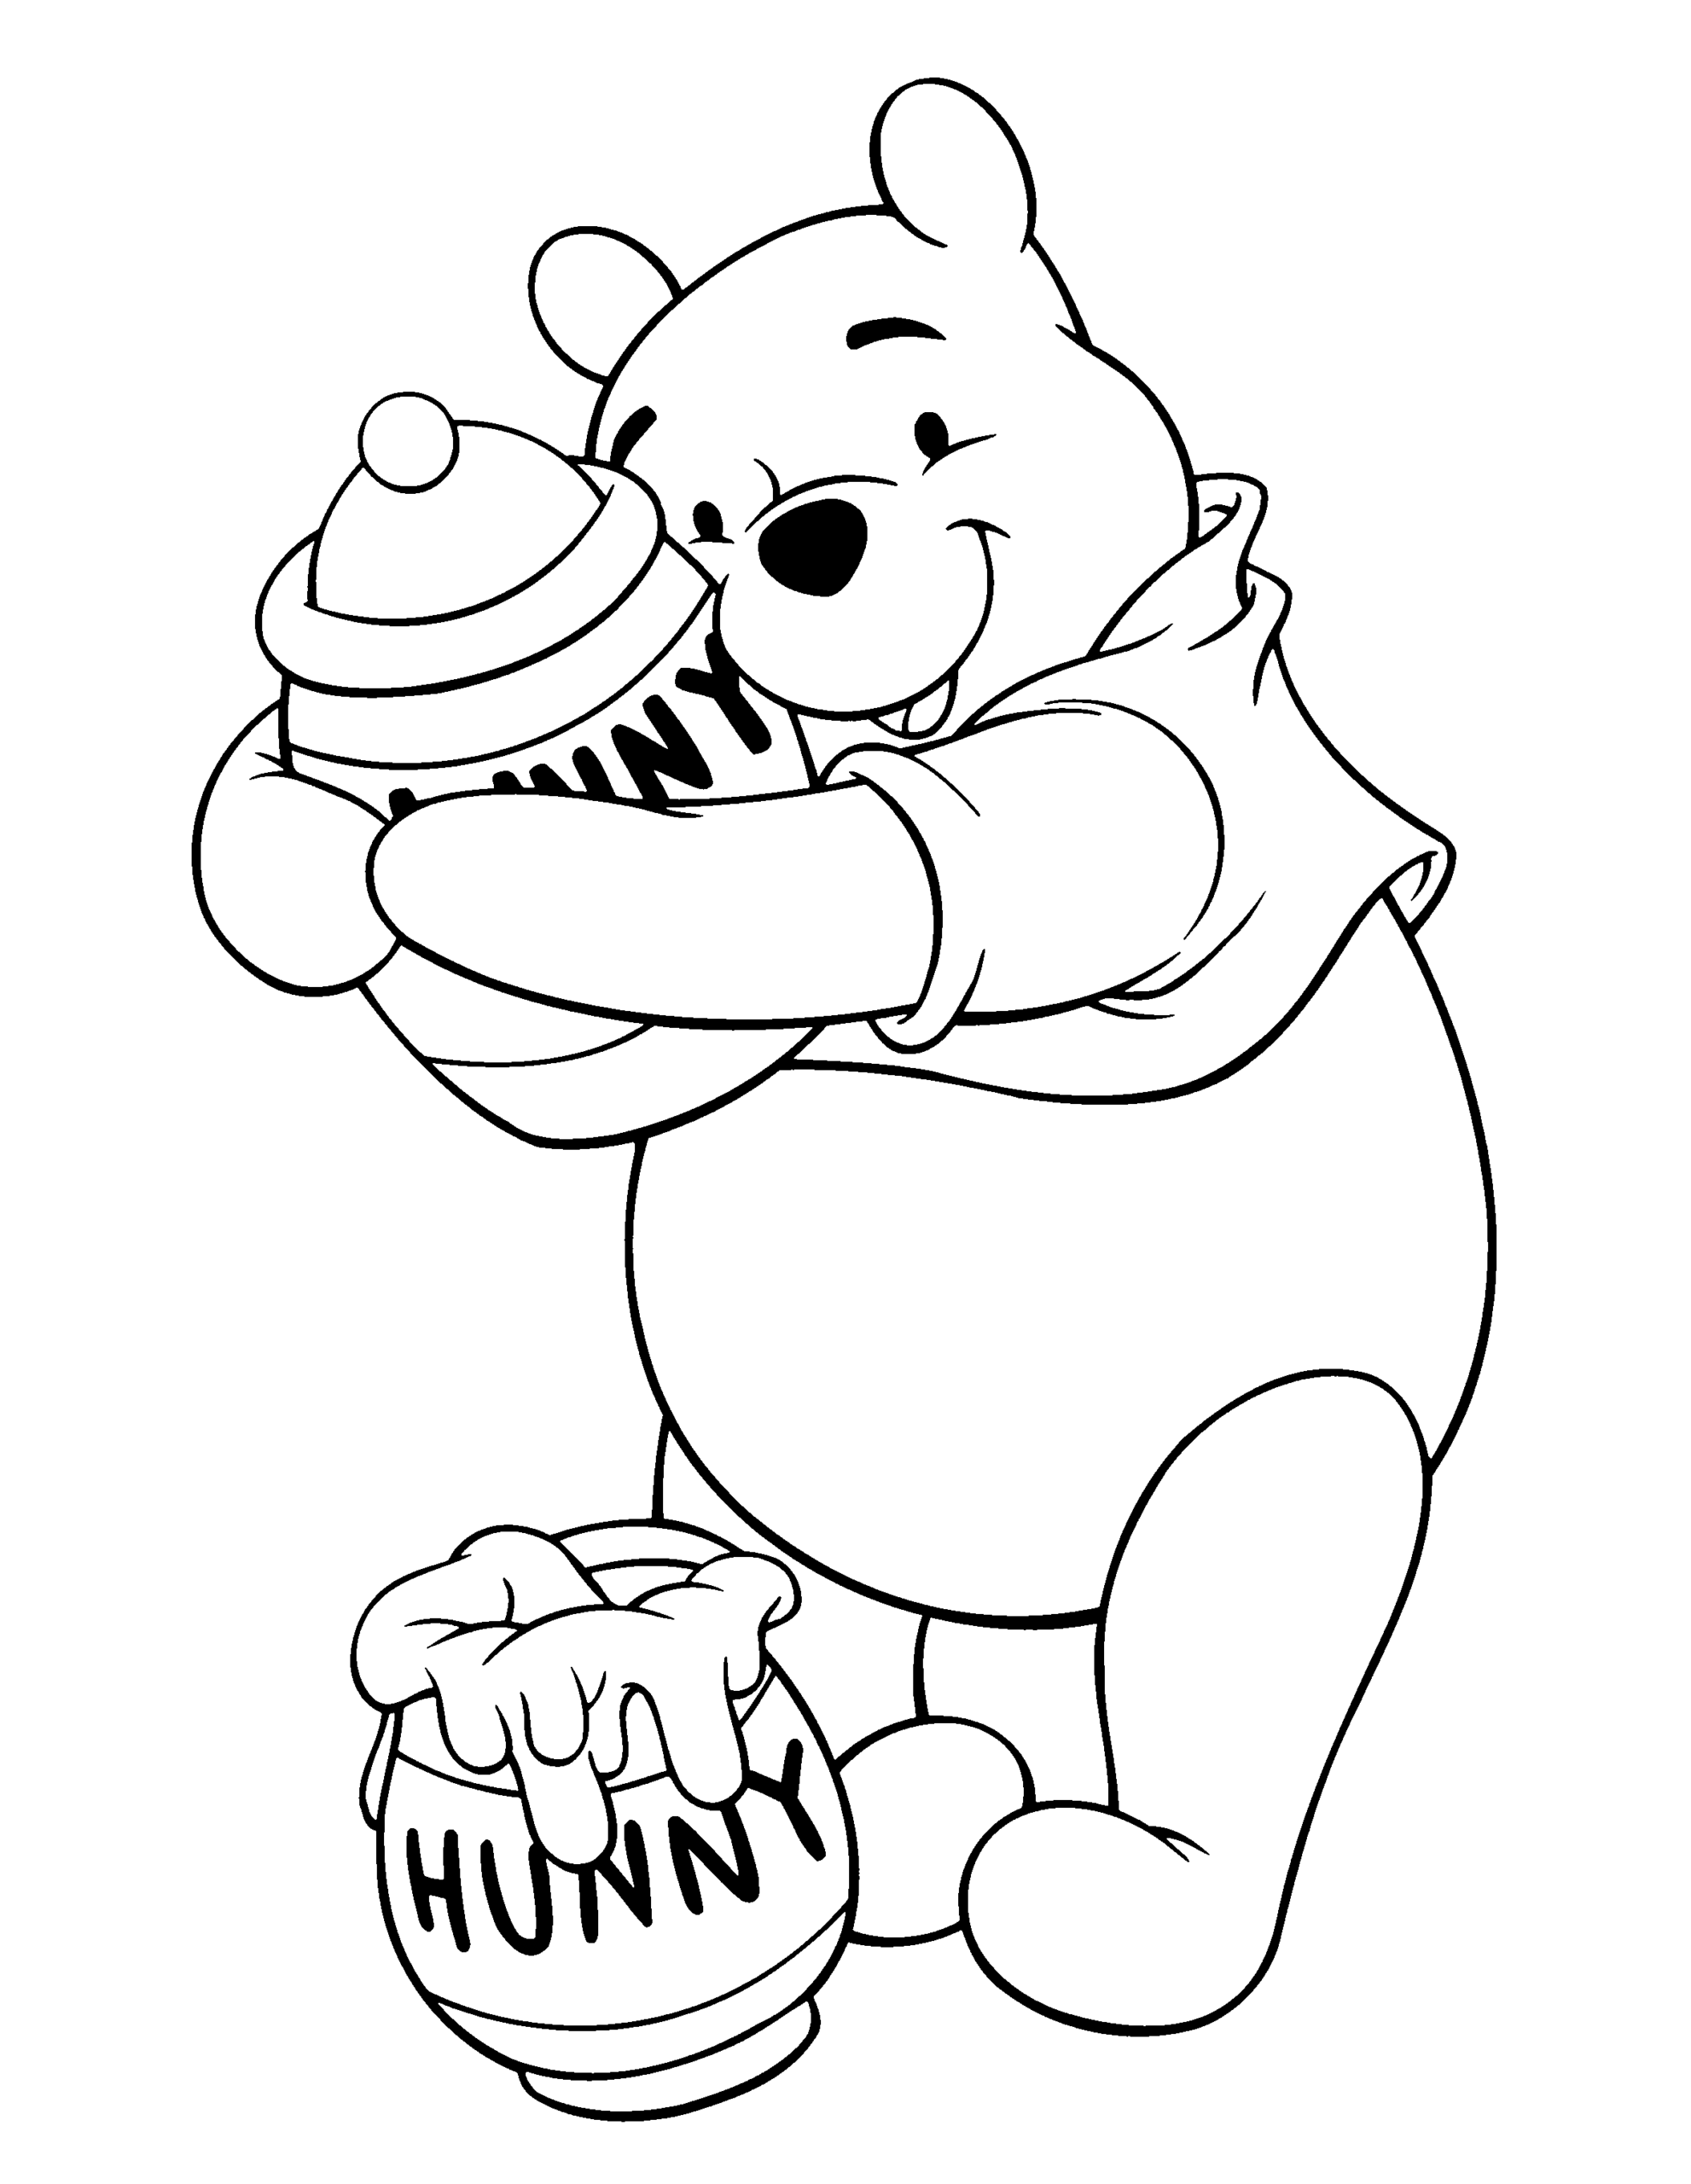 Winnie the Pooh Coloring Pages Cartoons winnie the pooh 79 Printable 2020 7198 Coloring4free